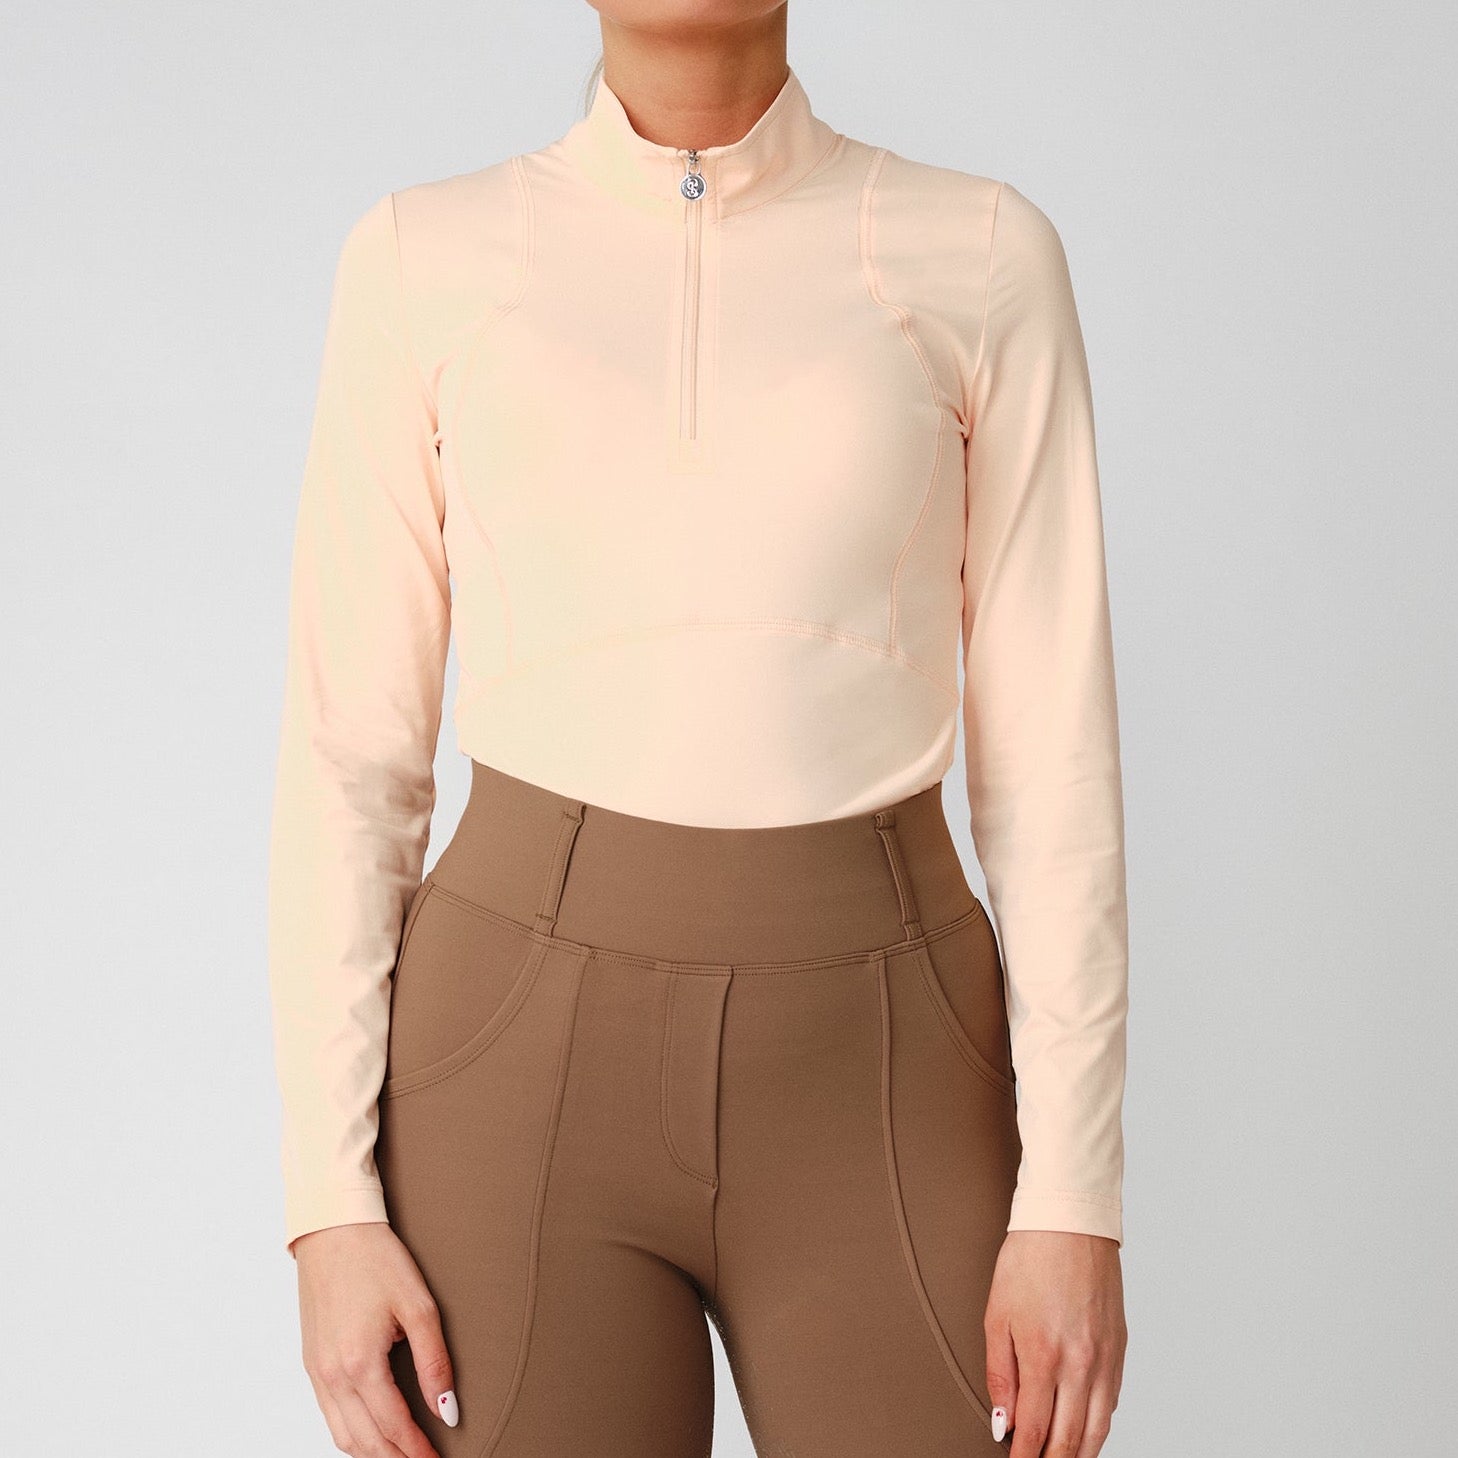 PS of Sweden Peach Adele long sleeve base layer